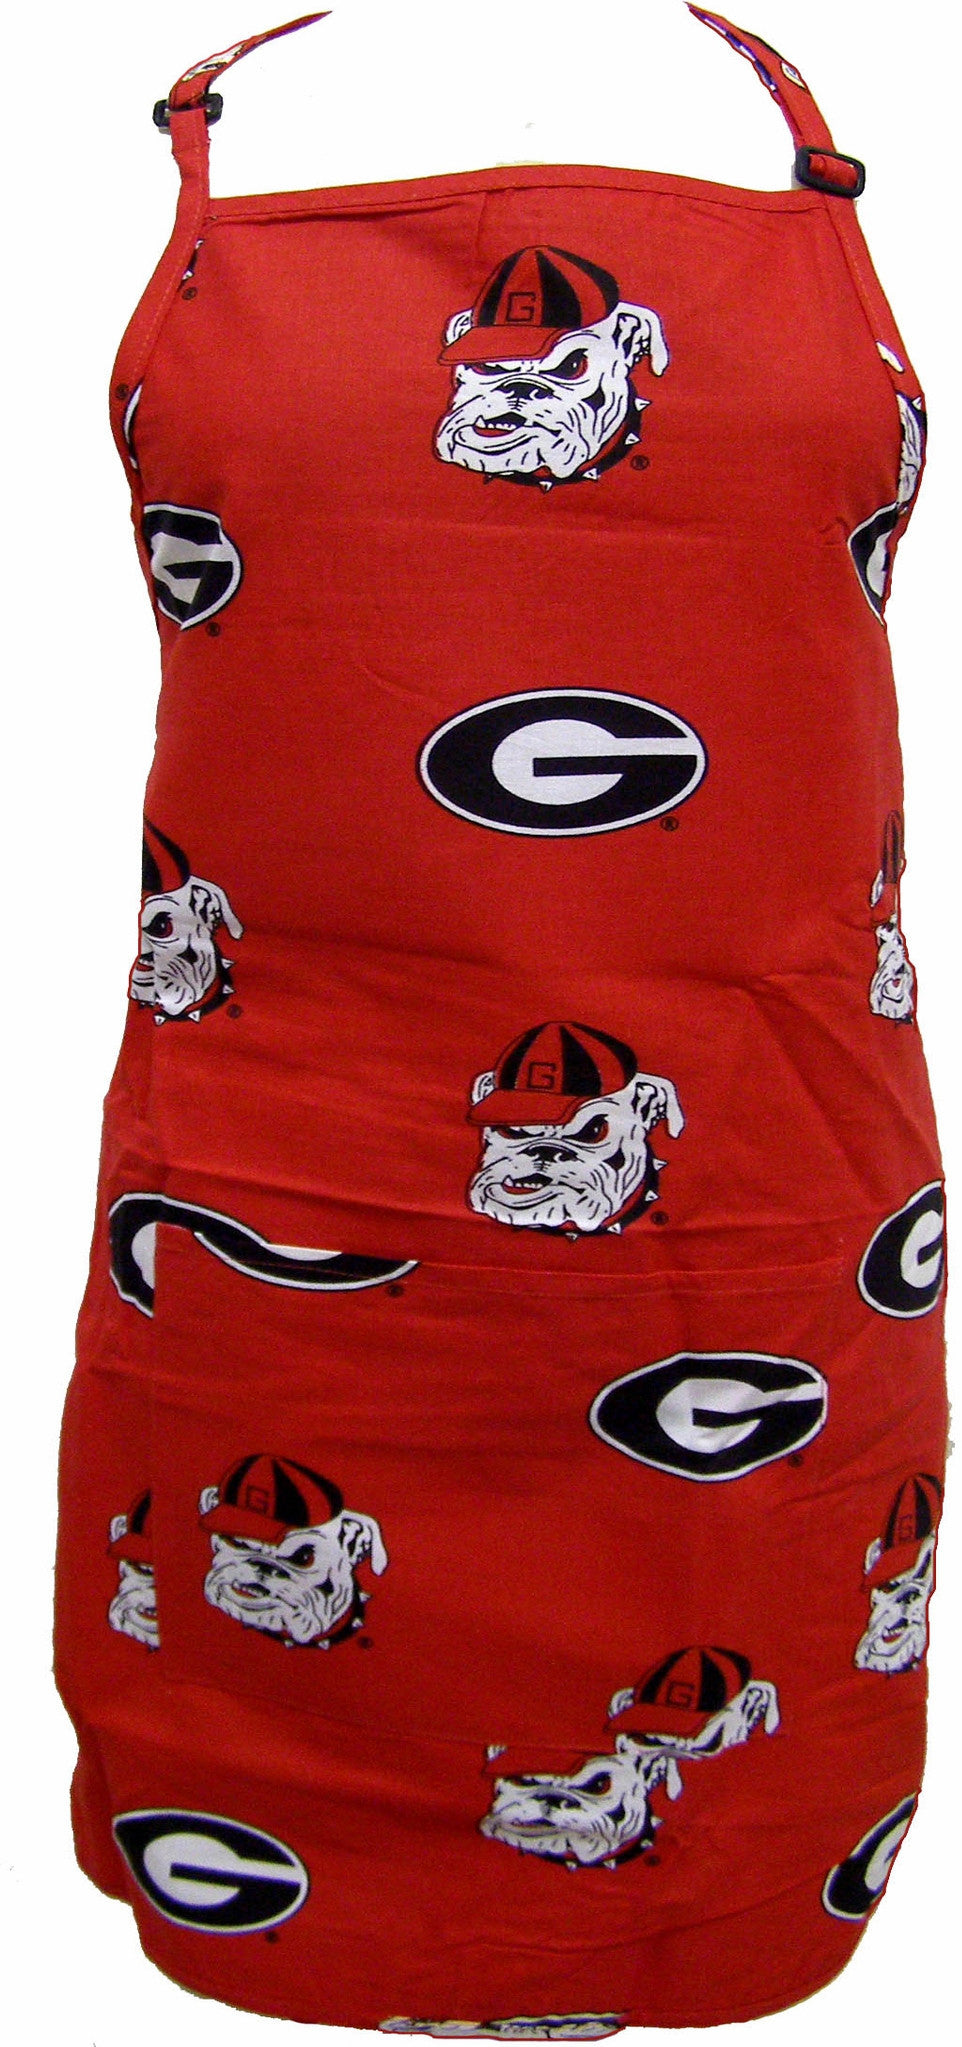 Georgia Apron 26"x35" With 9" Pocket - Geoapr By College Covers